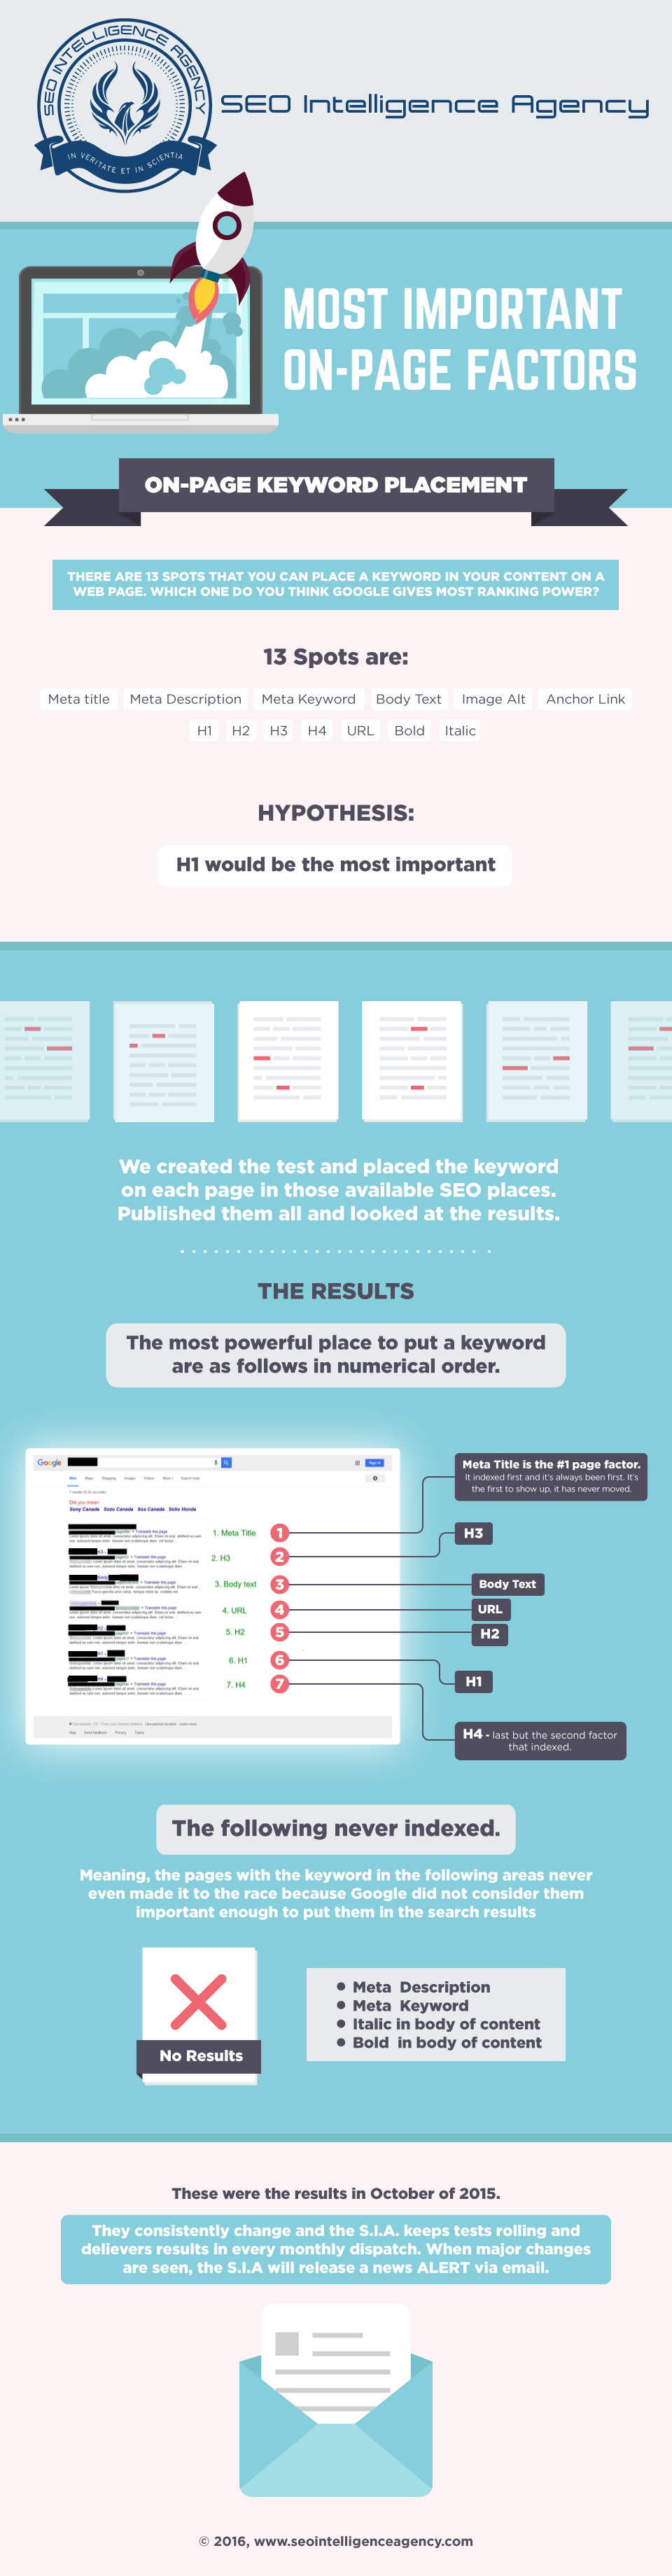 SEO Intelligence Agency OnPage Factors infographic